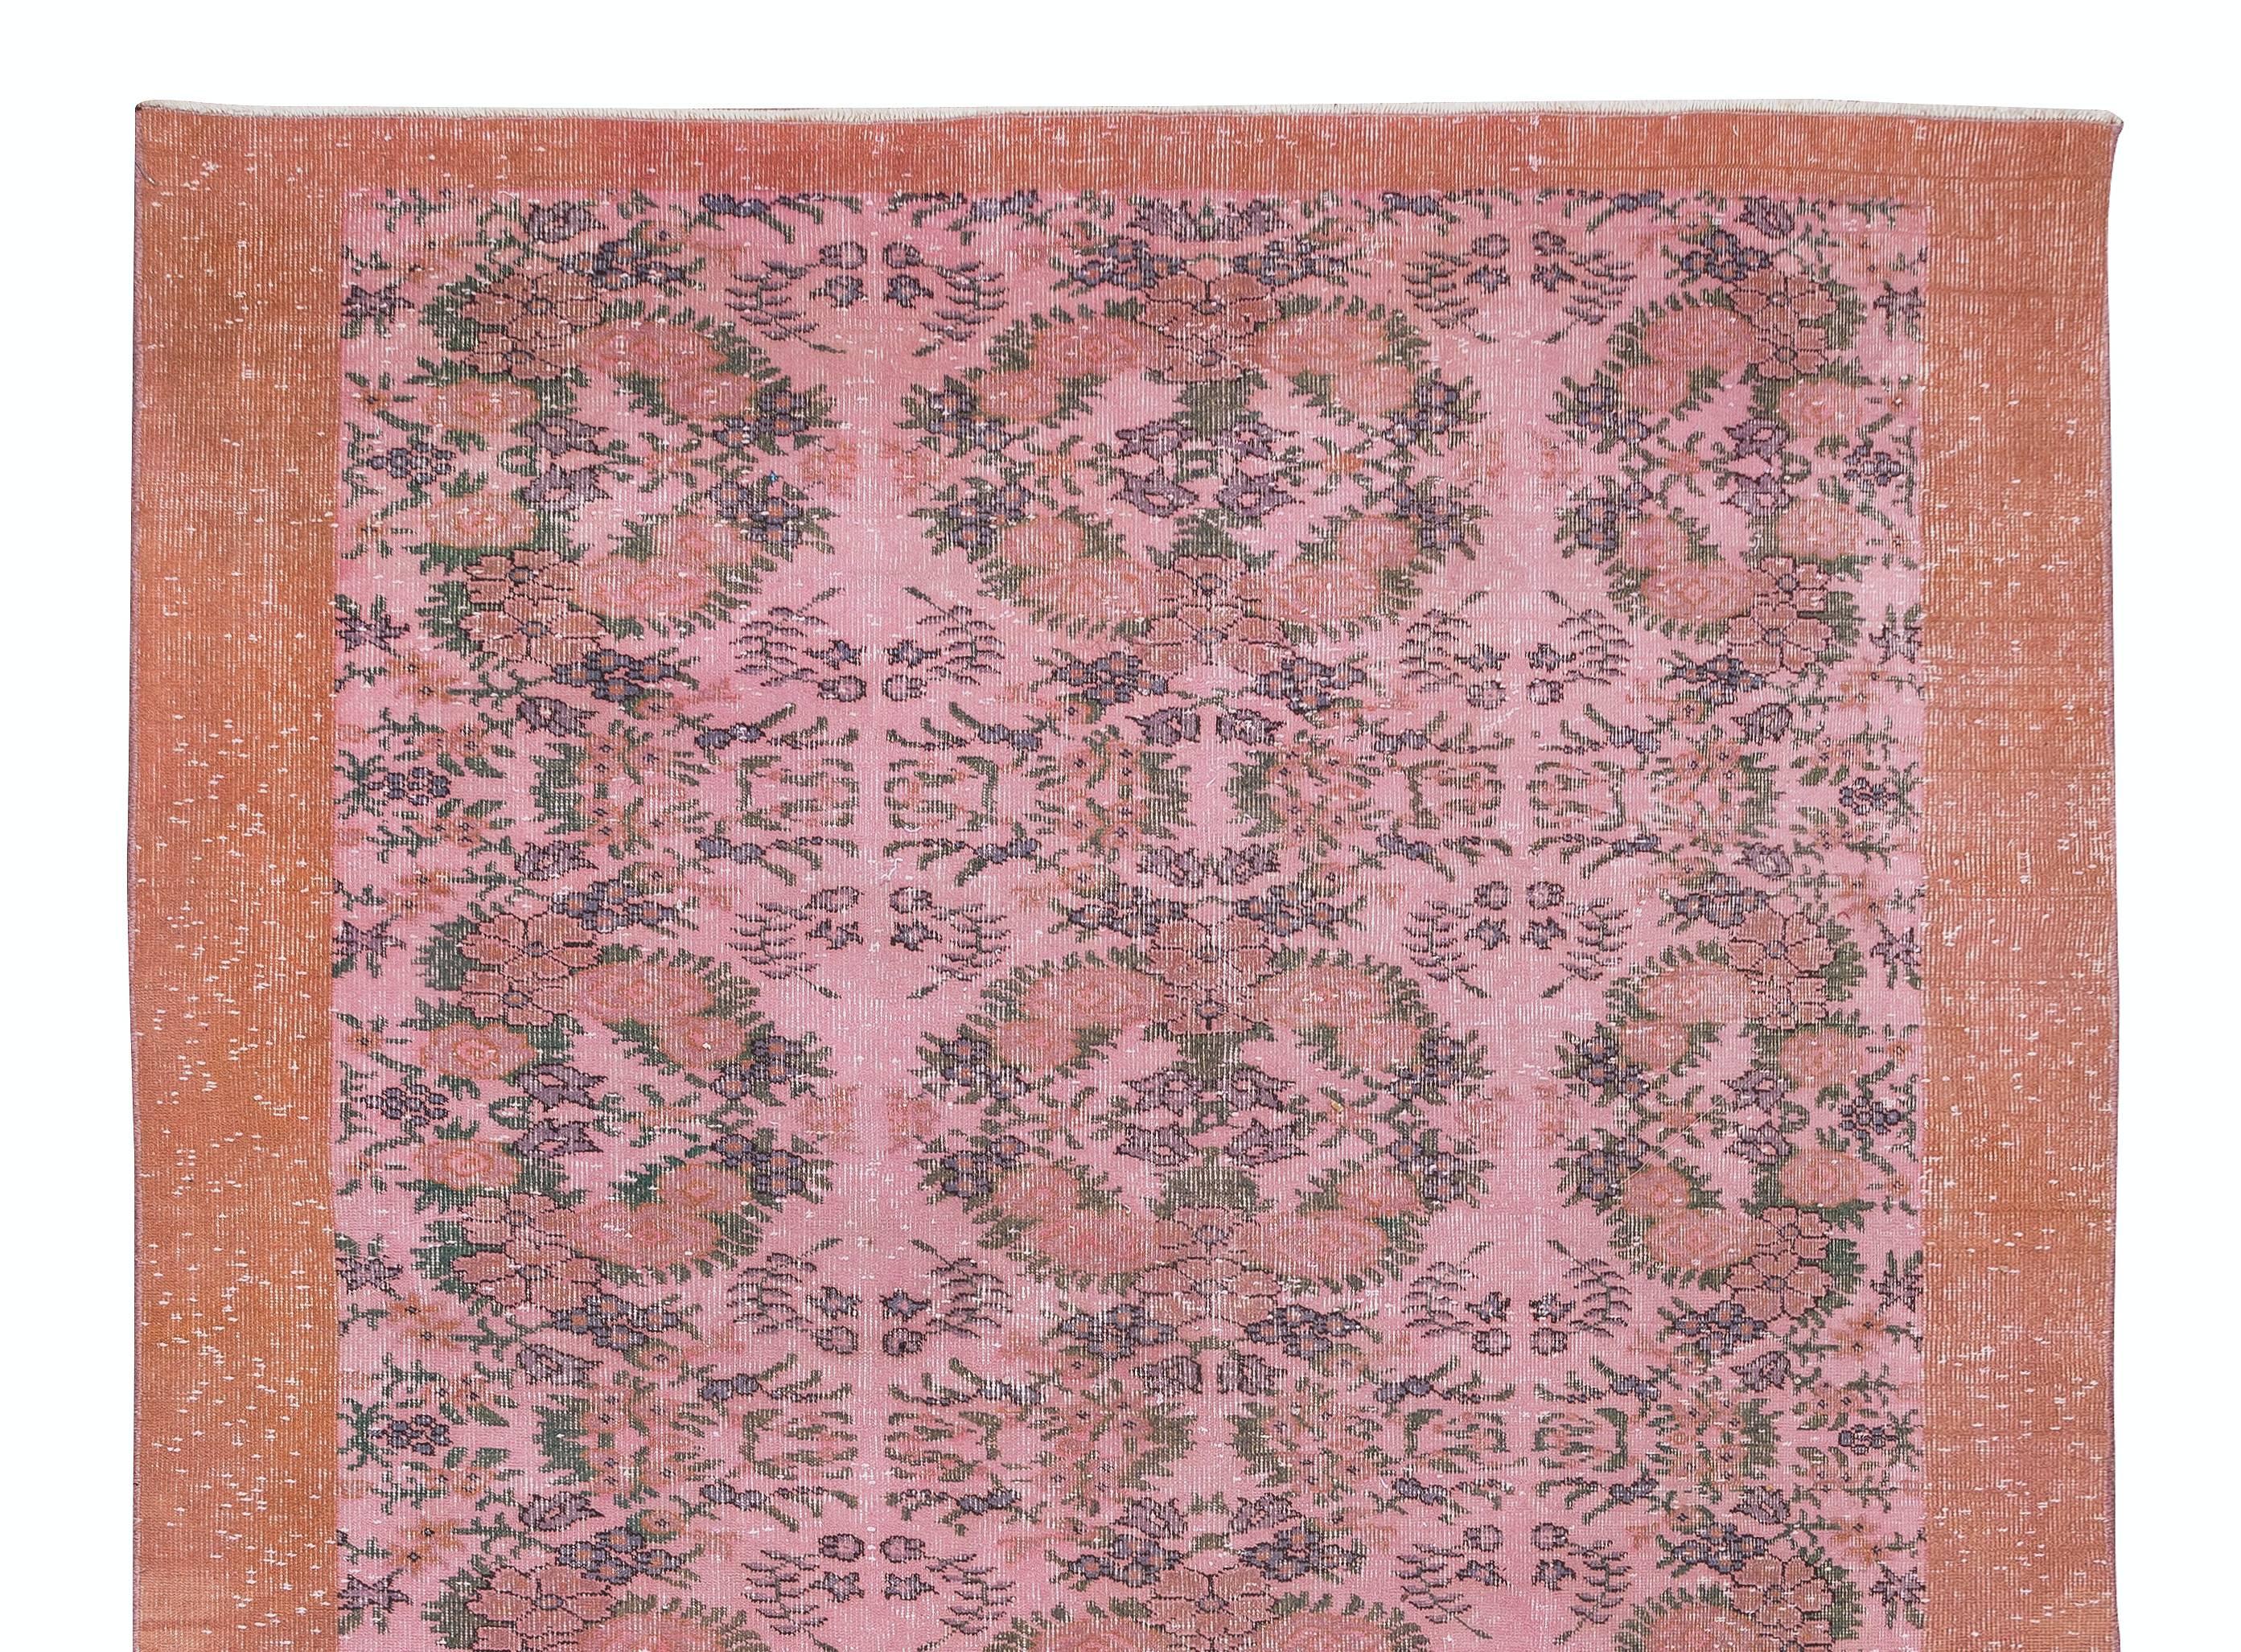 Hand-Knotted 7x10.7 Ft Handmade Floral Pattern Anatolian Area Rug in Pink 4 Modern Interiors For Sale